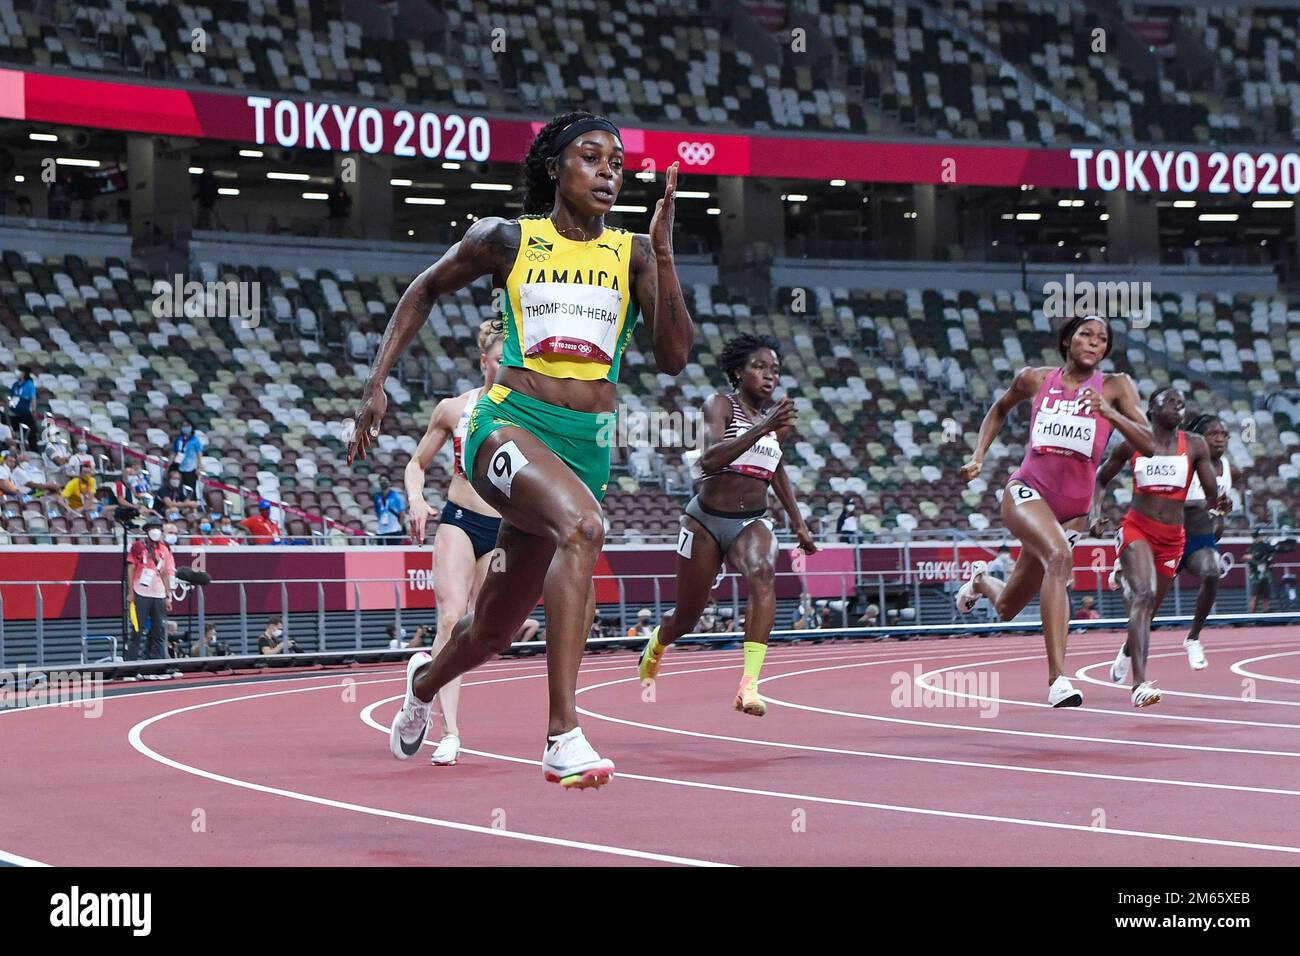 Elaine Thompson-Herah (JAM) competing in the Women's 200 metres Semifinals at the 2020 (2021) Olympic Summer Games, Tokyo, Japan Stock Photo